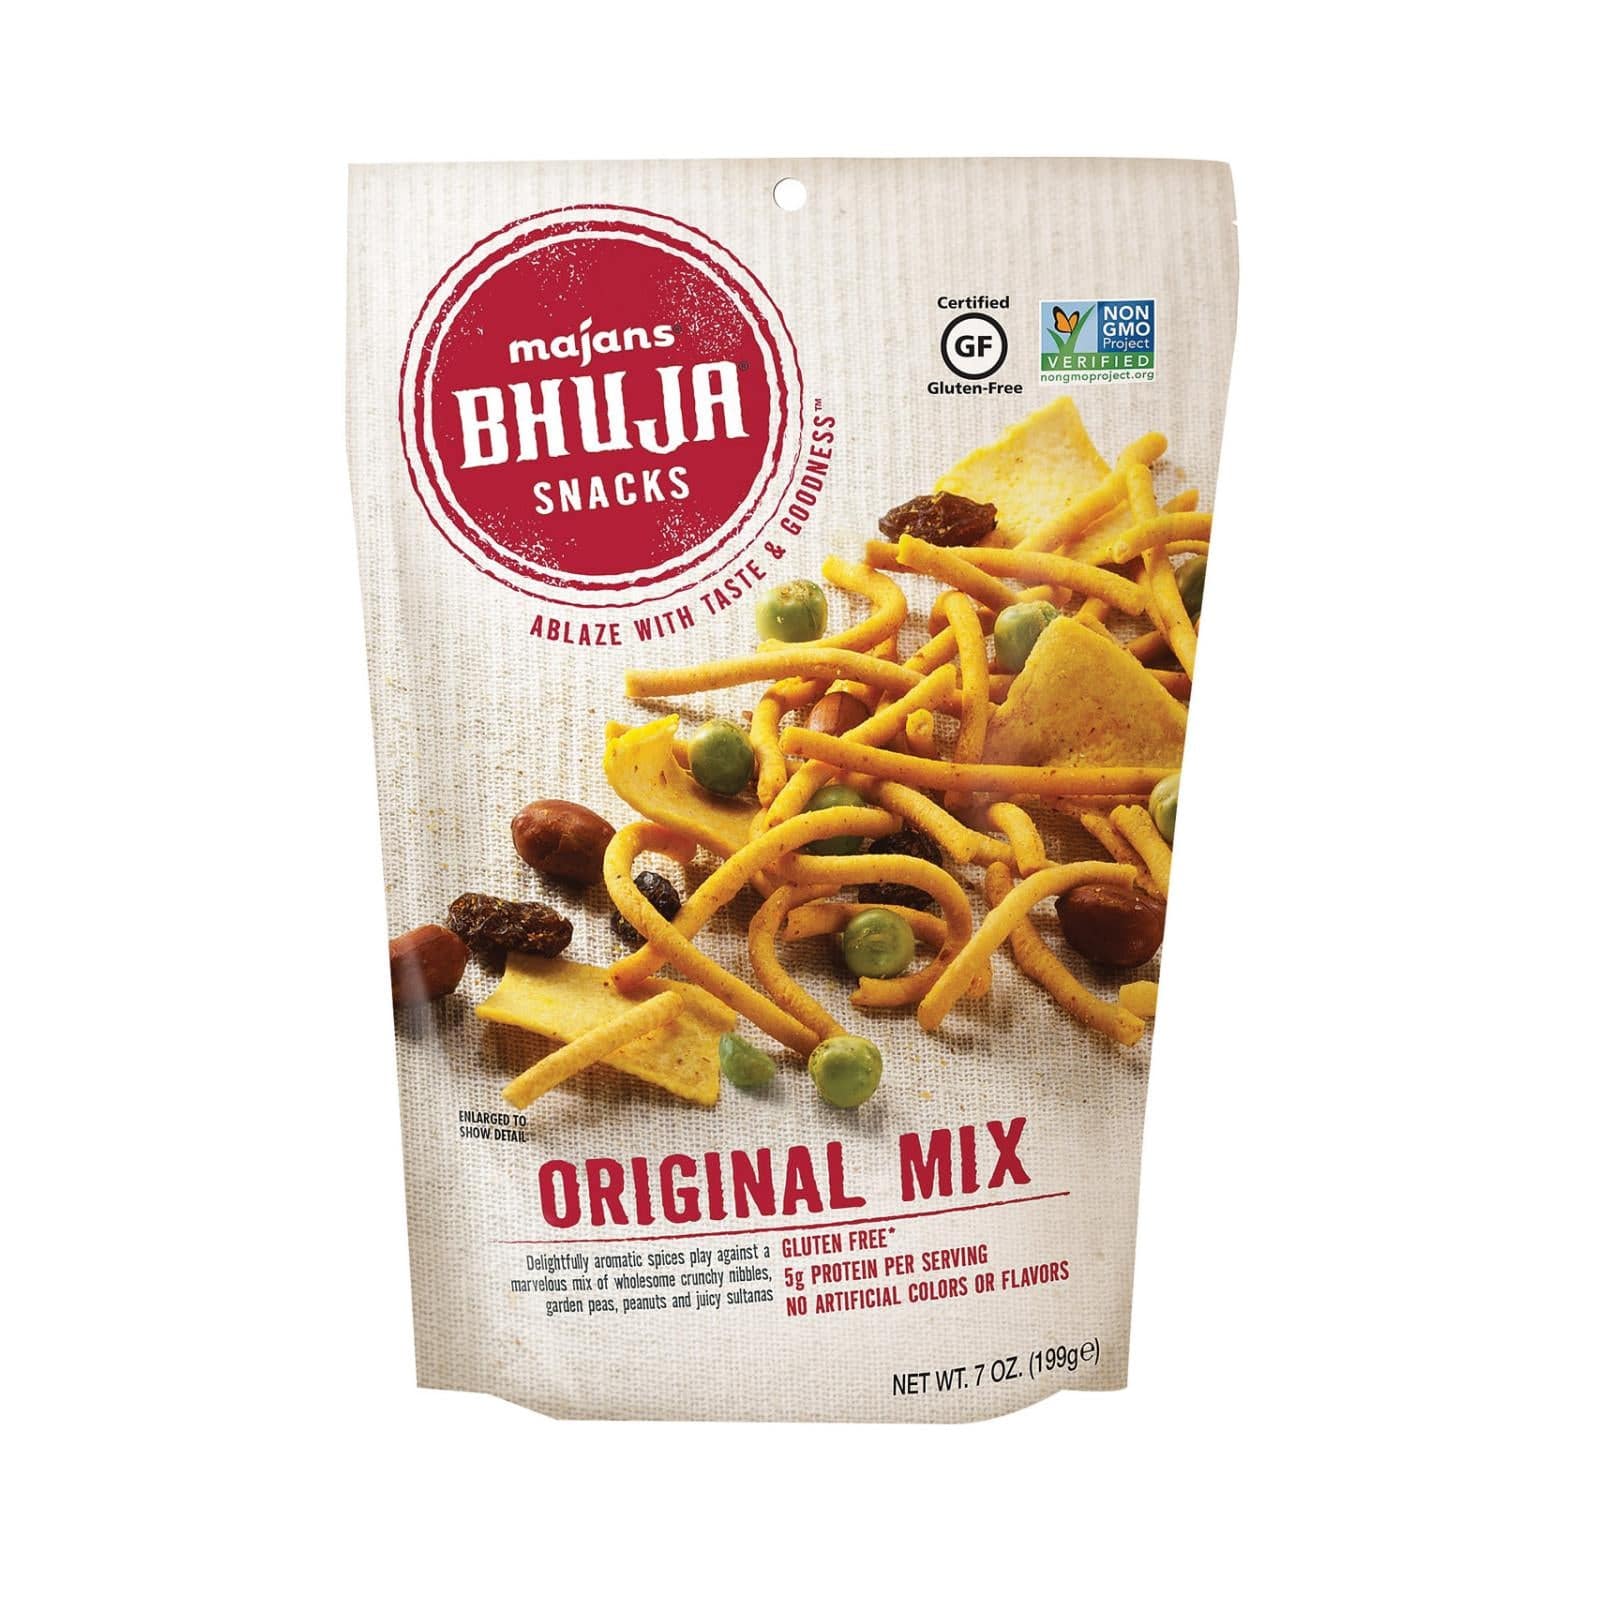 Buy Bhuja Snacks - Original Mix - Case Of 6 - 7 Oz.  at OnlyNaturals.us